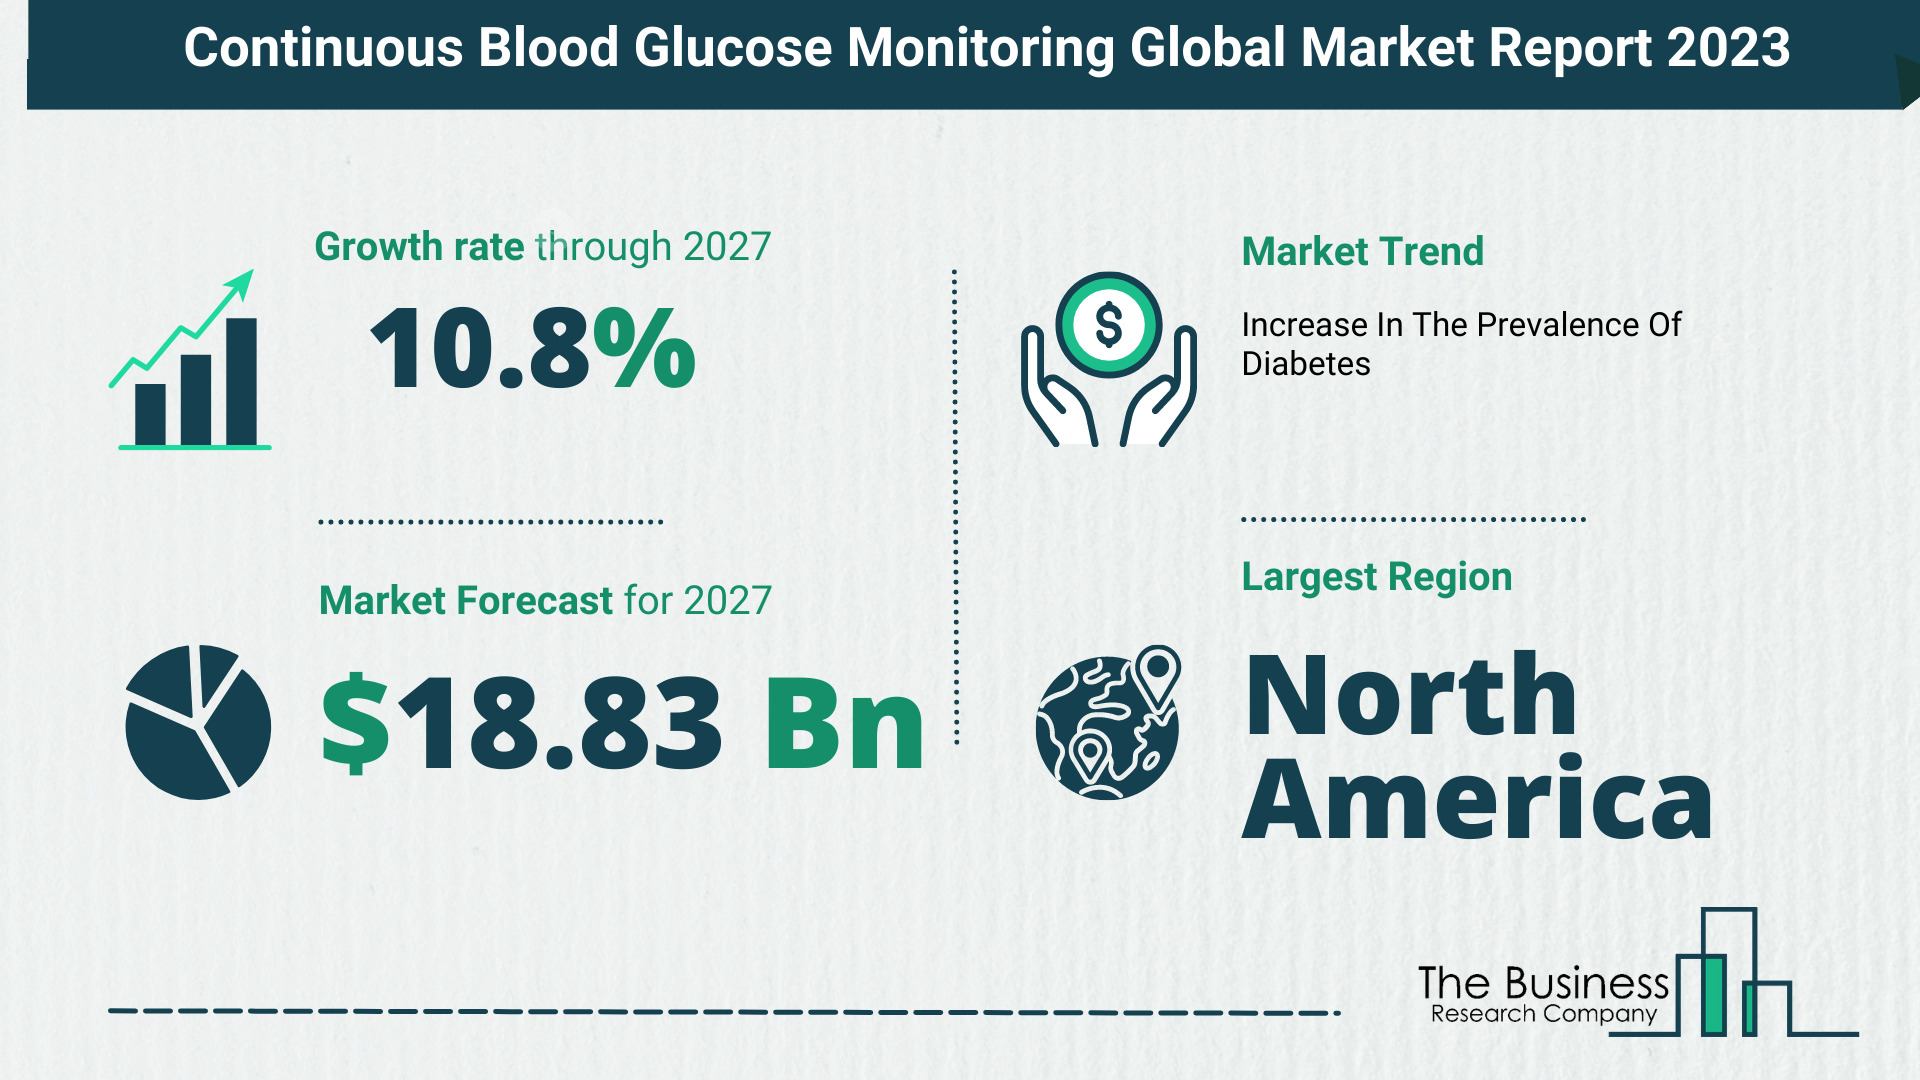 Continuous Blood Glucose Monitoring Market Overview: Market Size, Drivers And Trends